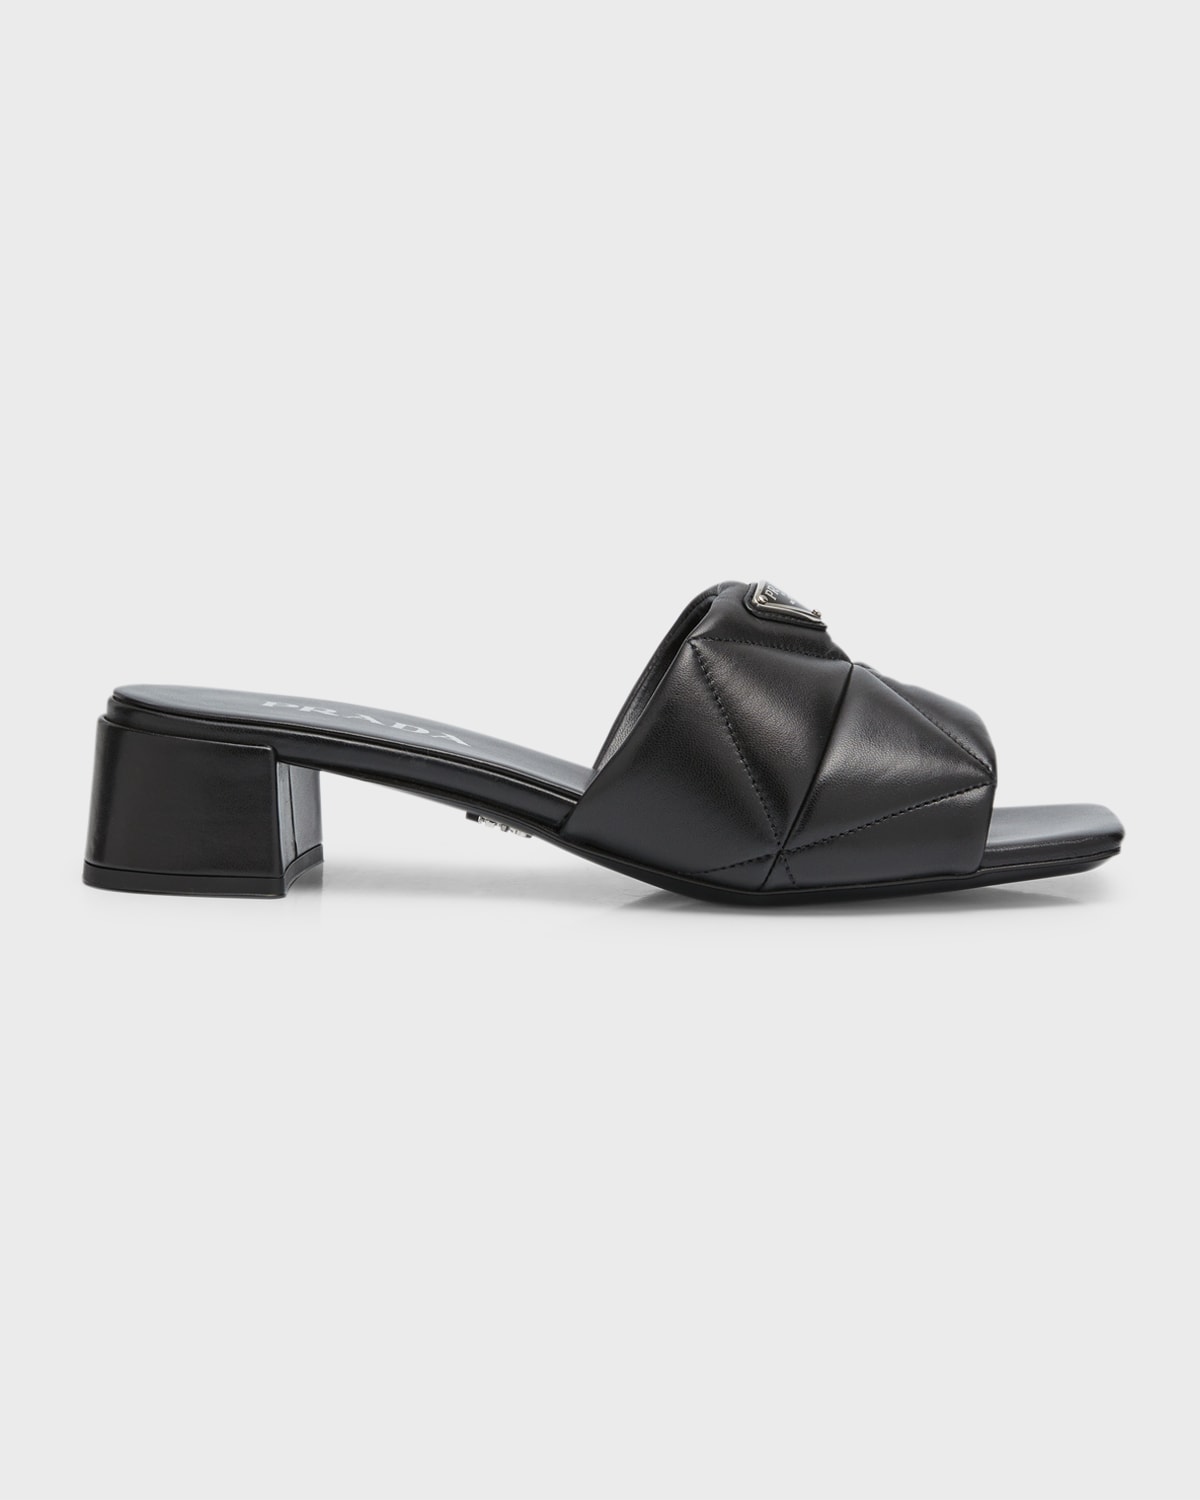 Tory Burch Patos Disc Leather Slide Sandals | Neiman Marcus